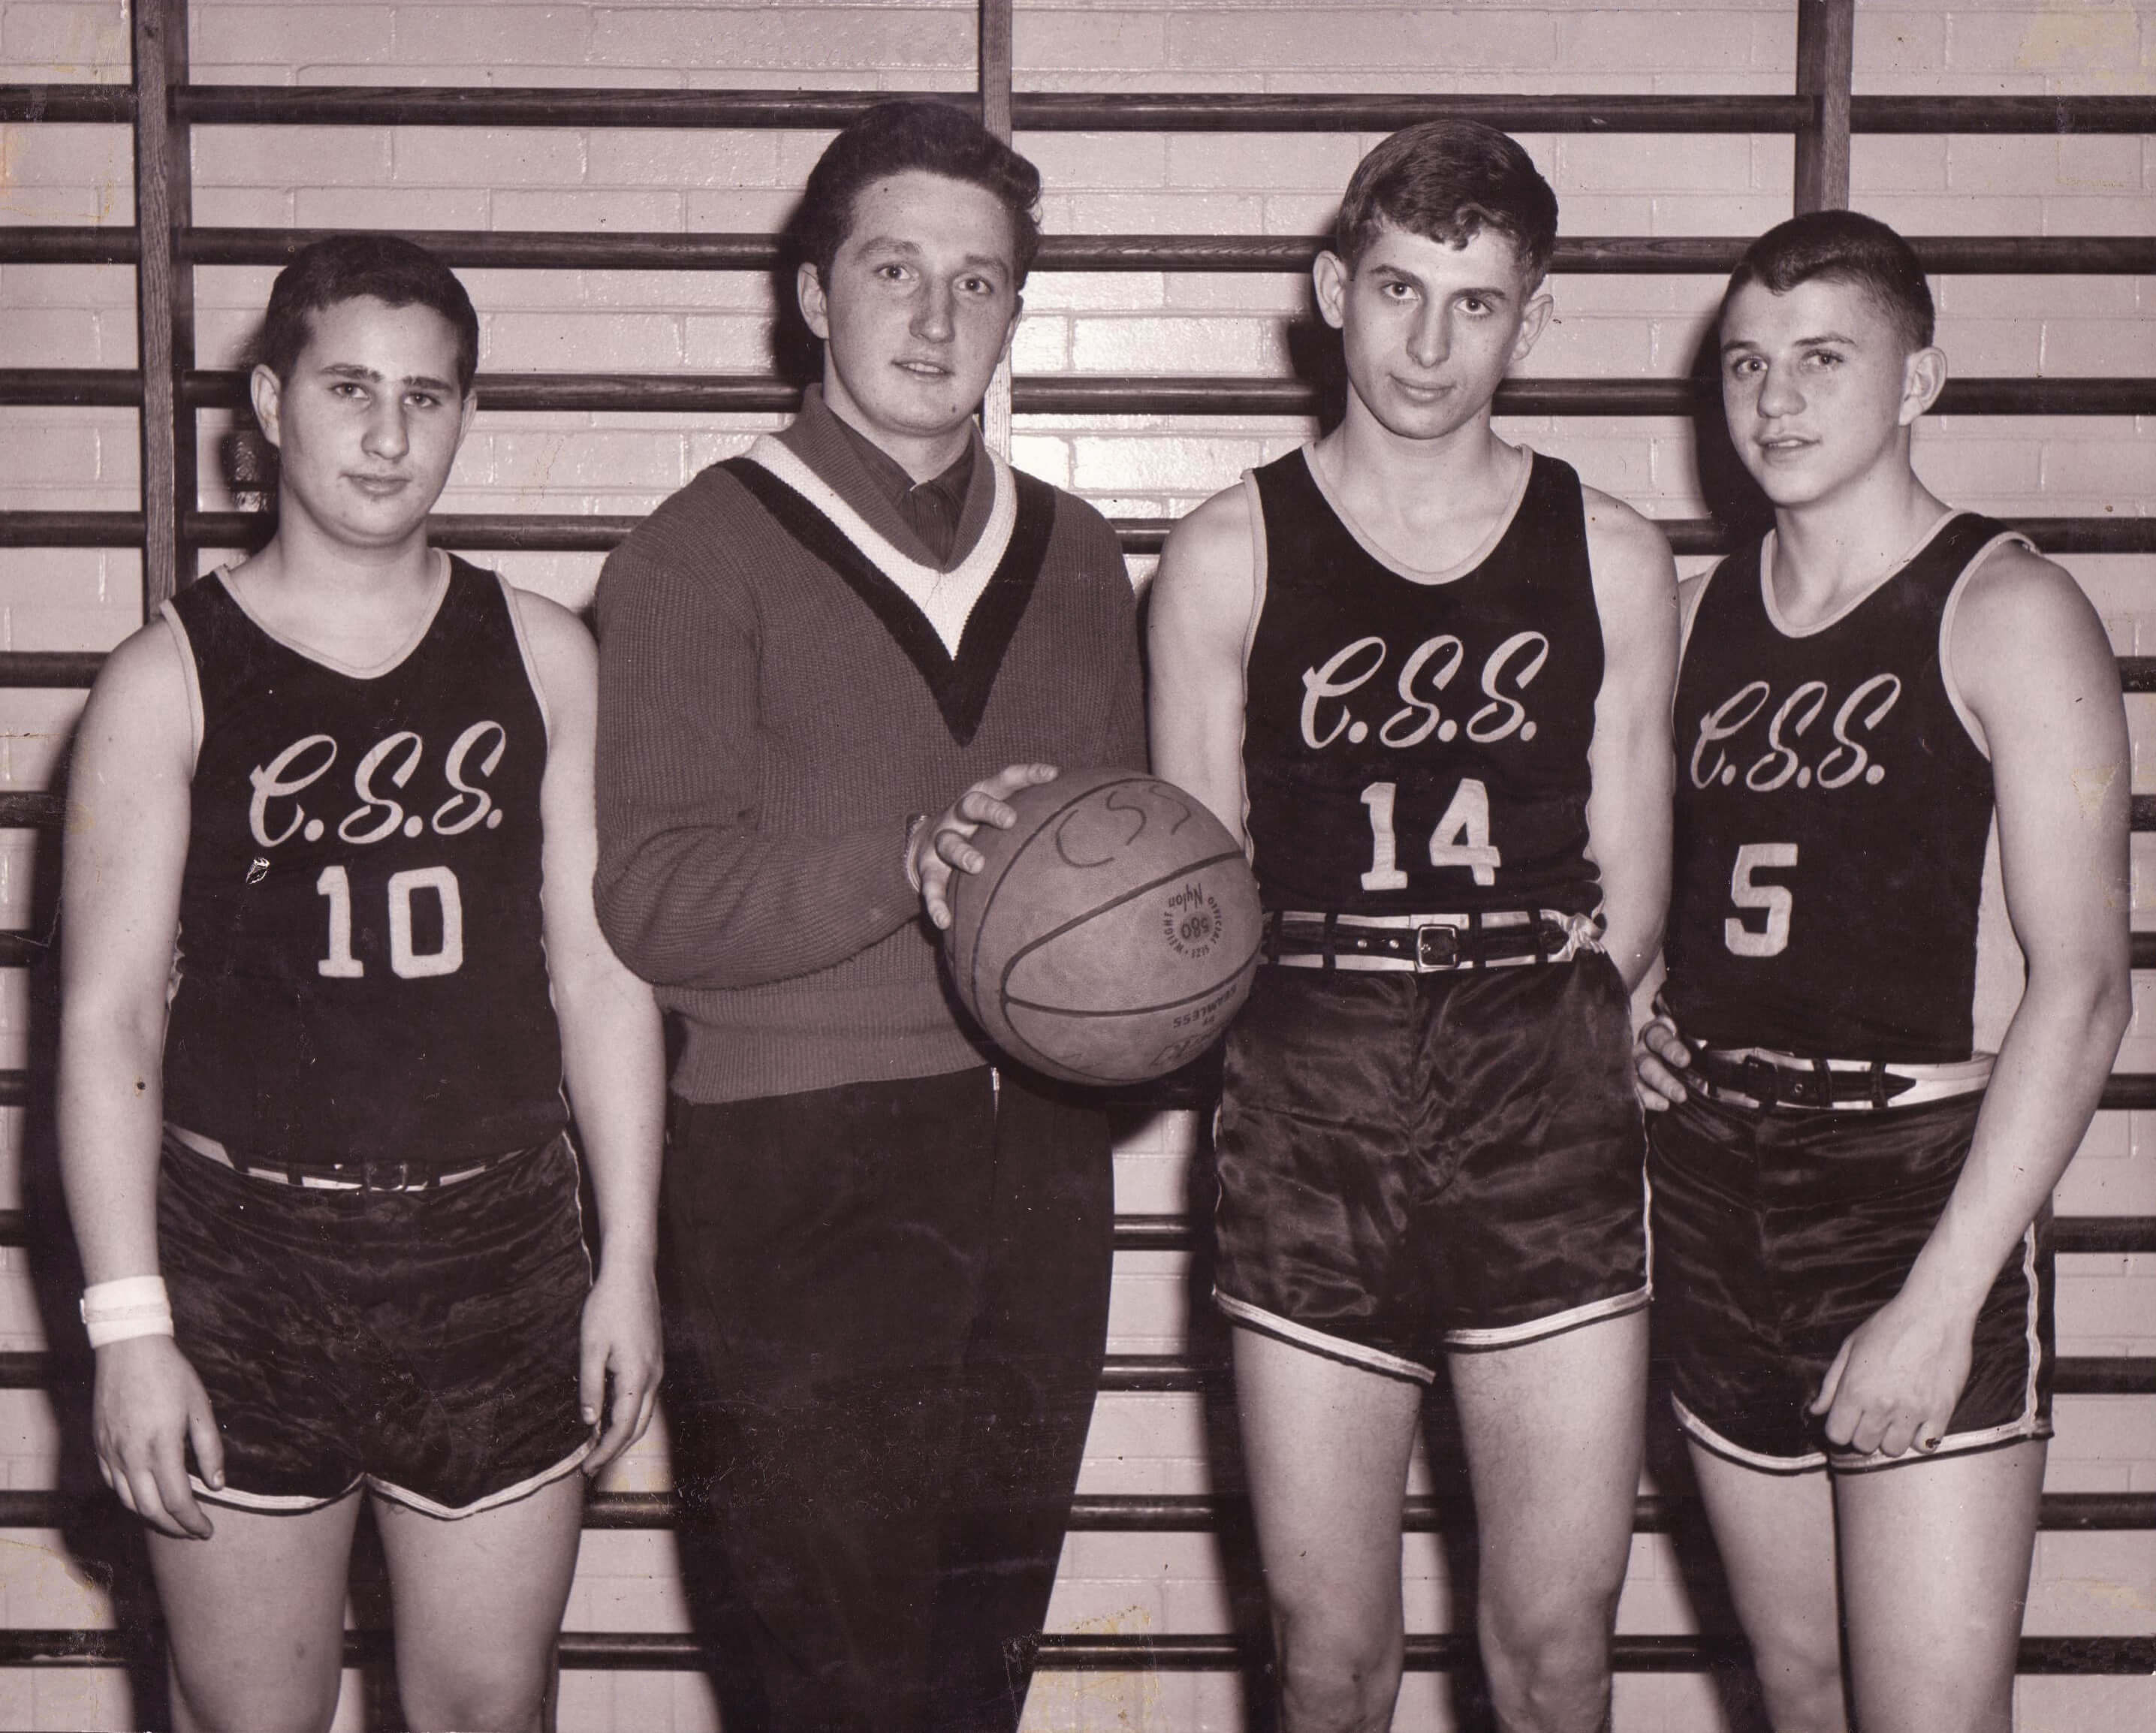 Sports - Pictures - Basketball - 1960s.x.x. - Clark Street Sun Jerseys, Earl + Izzy and two others.jpg